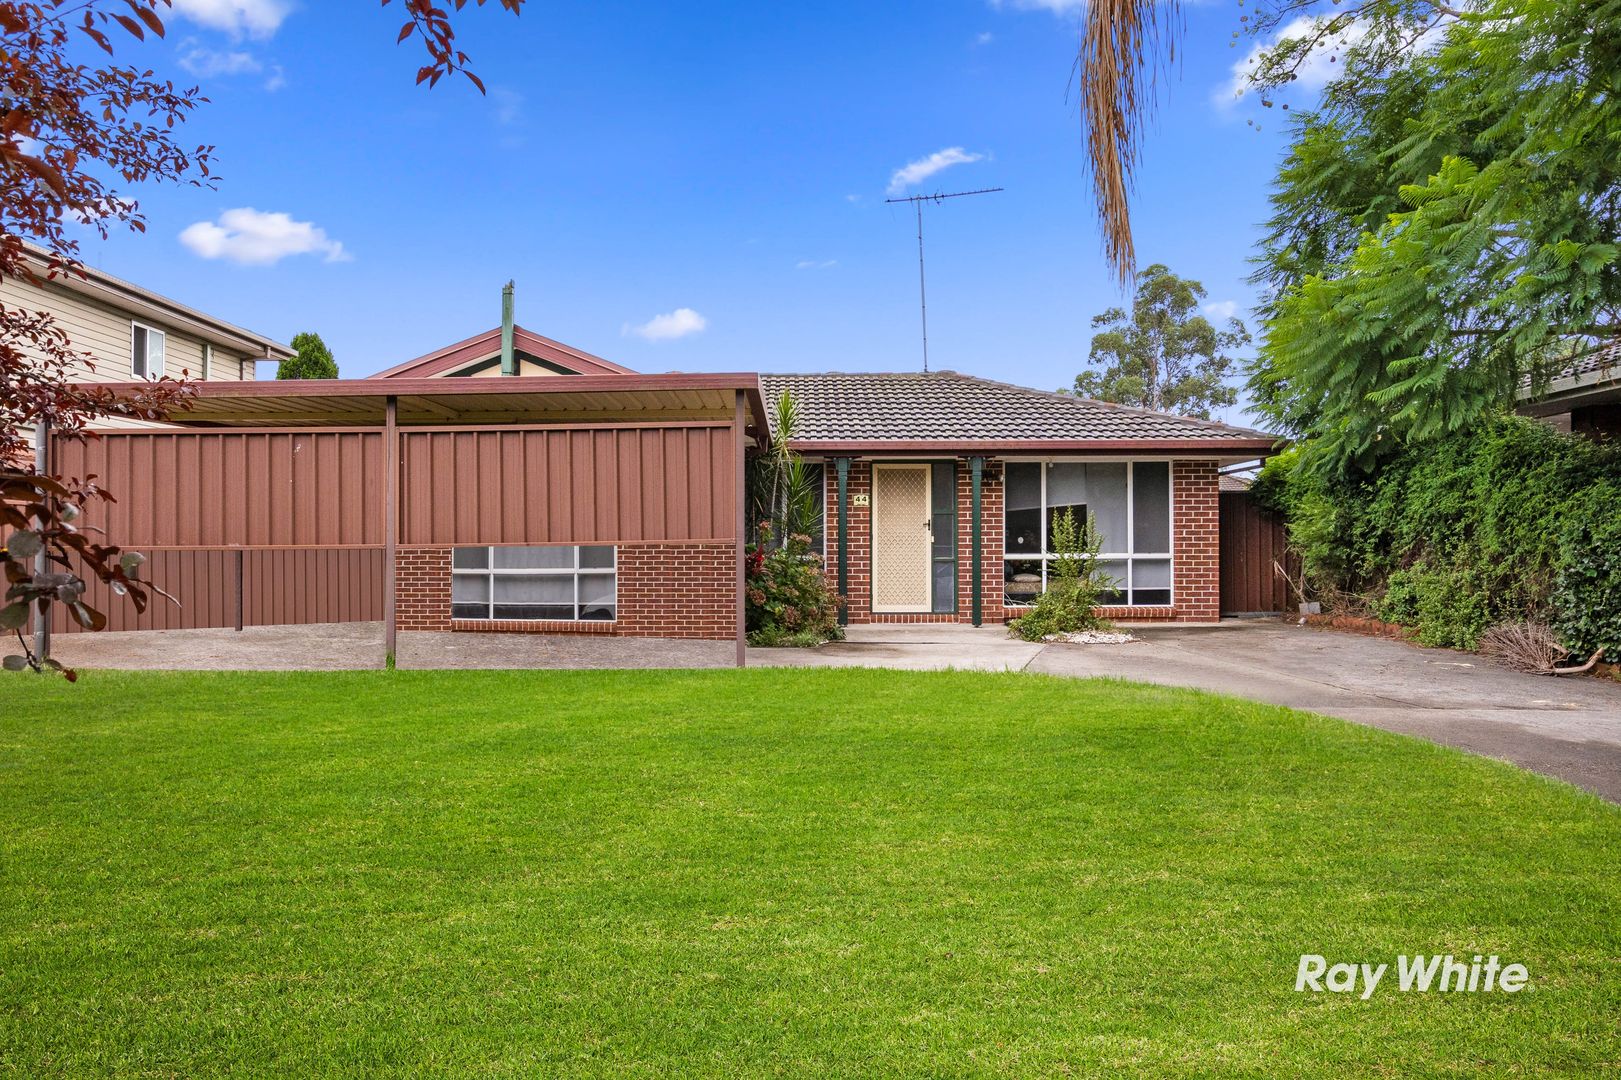 44 Foxwood Avenue, Quakers Hill NSW 2763